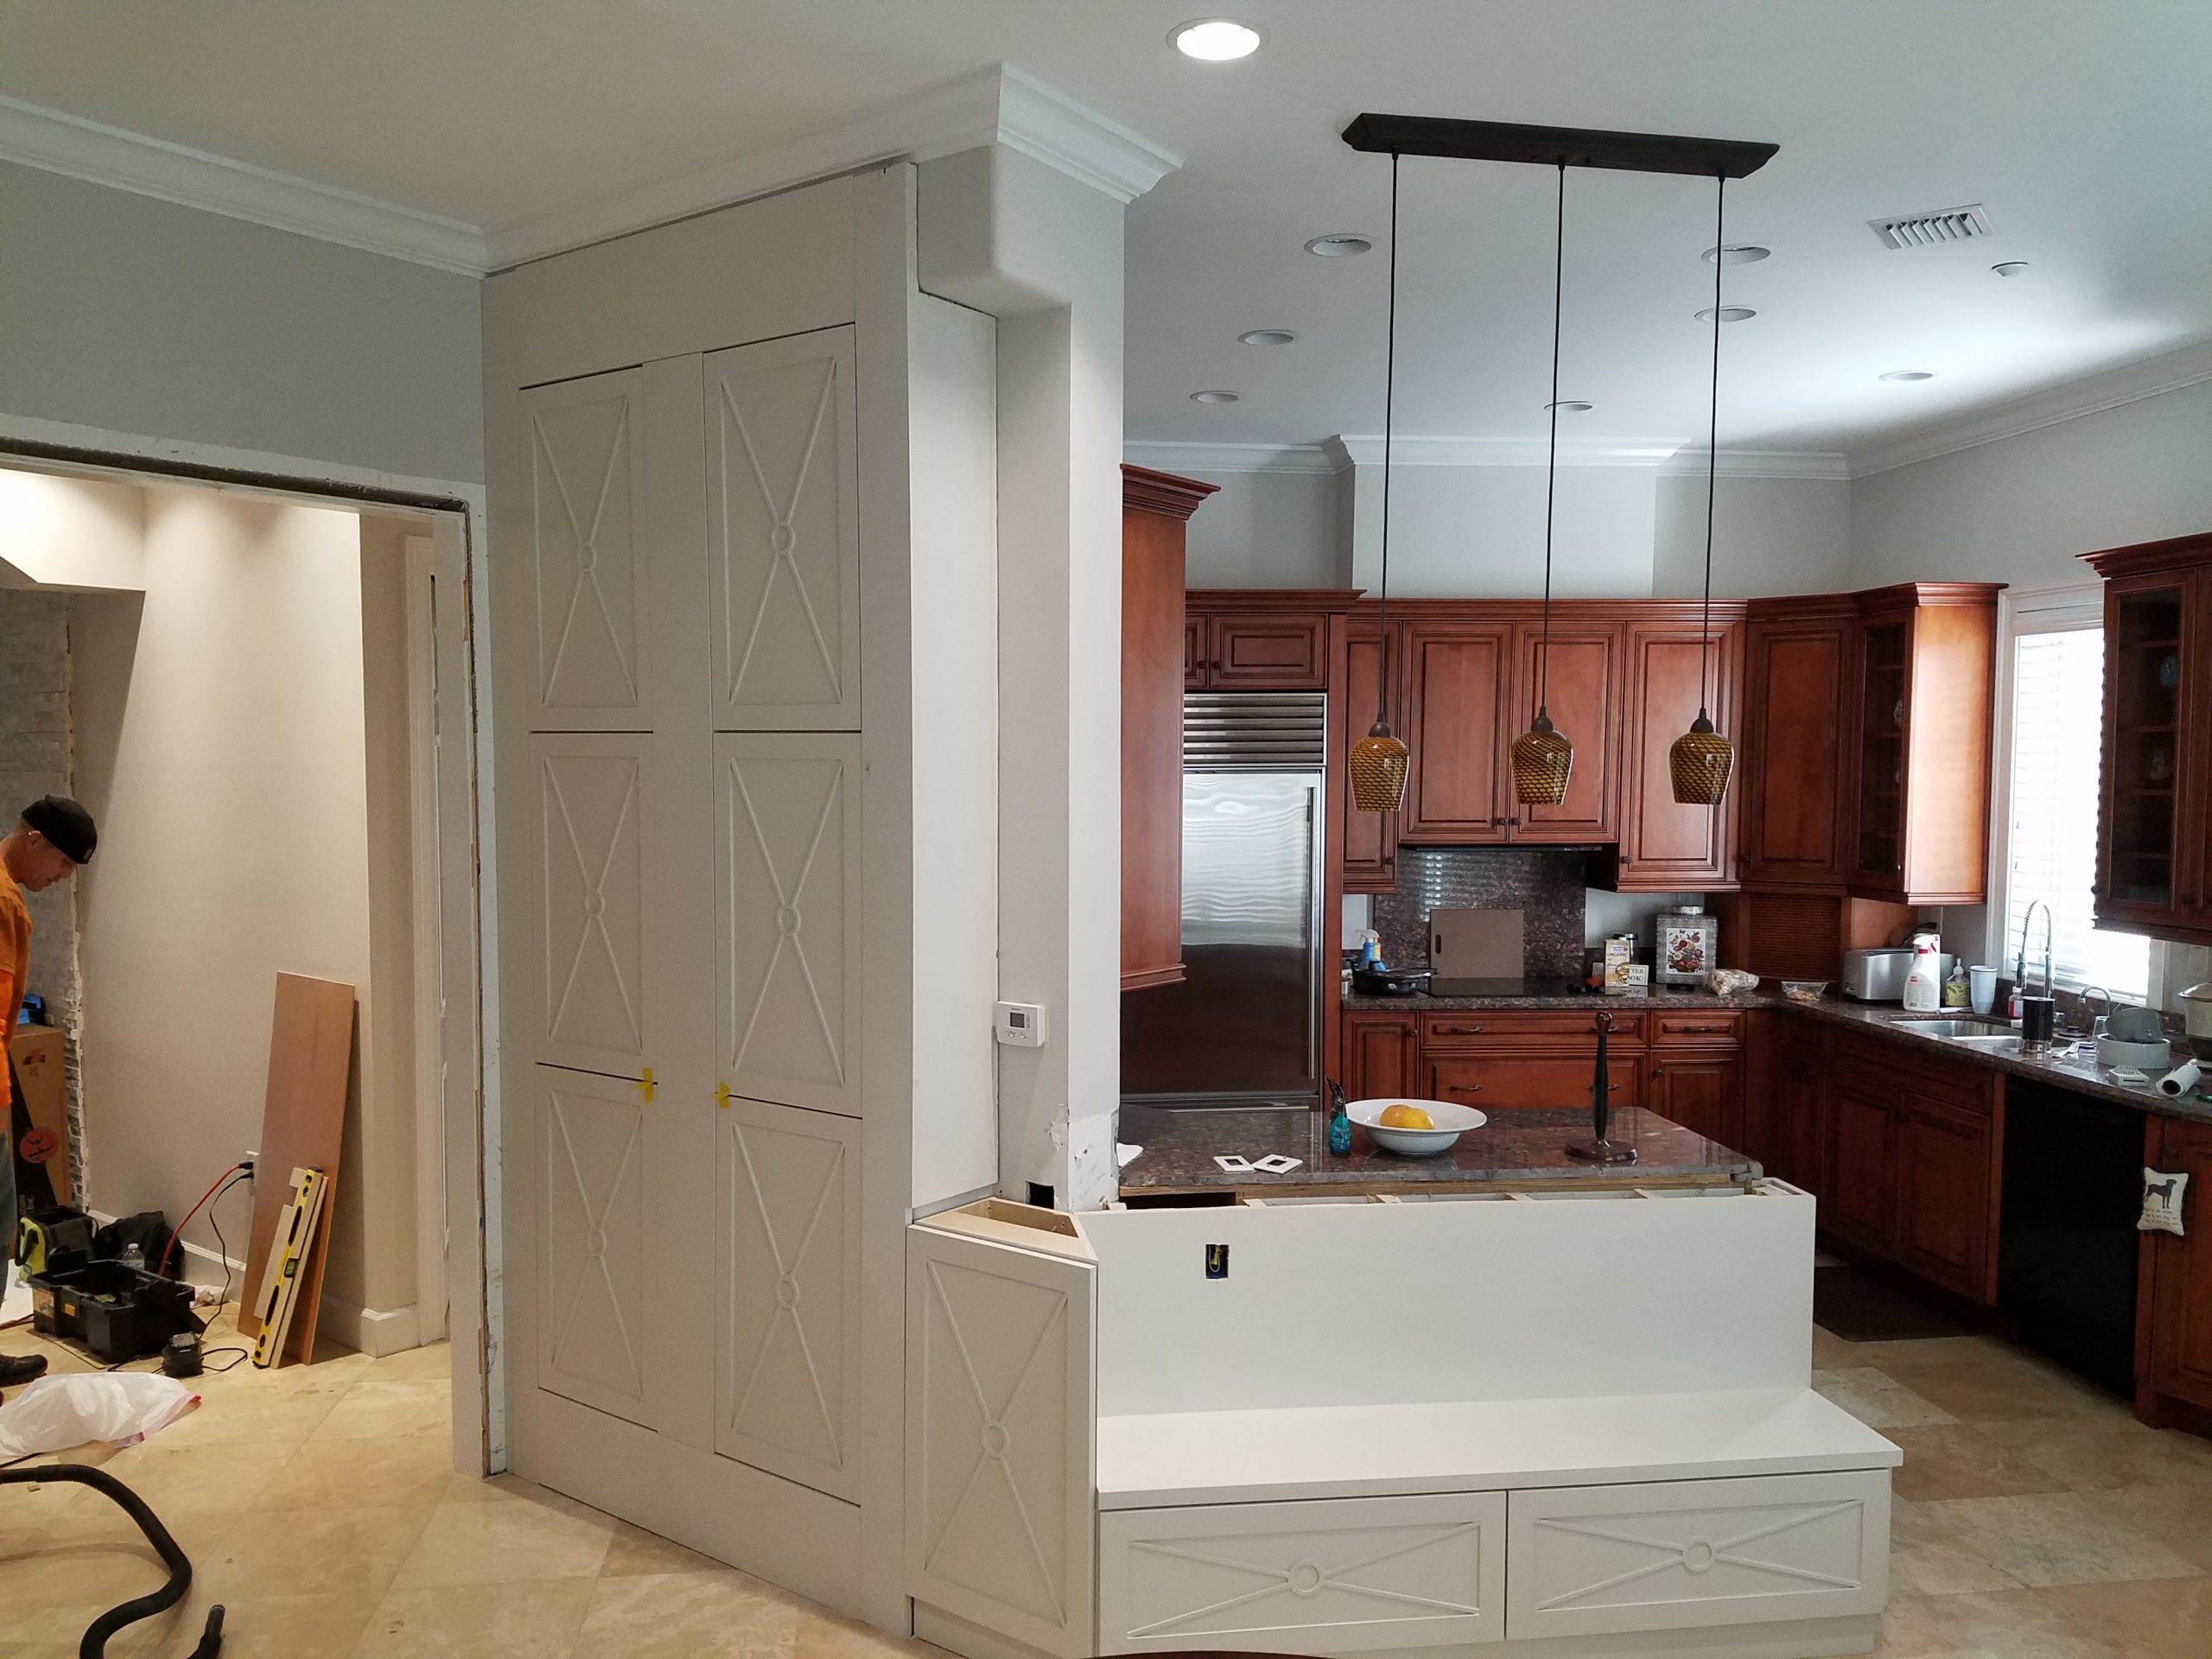 White cabinets and drawers